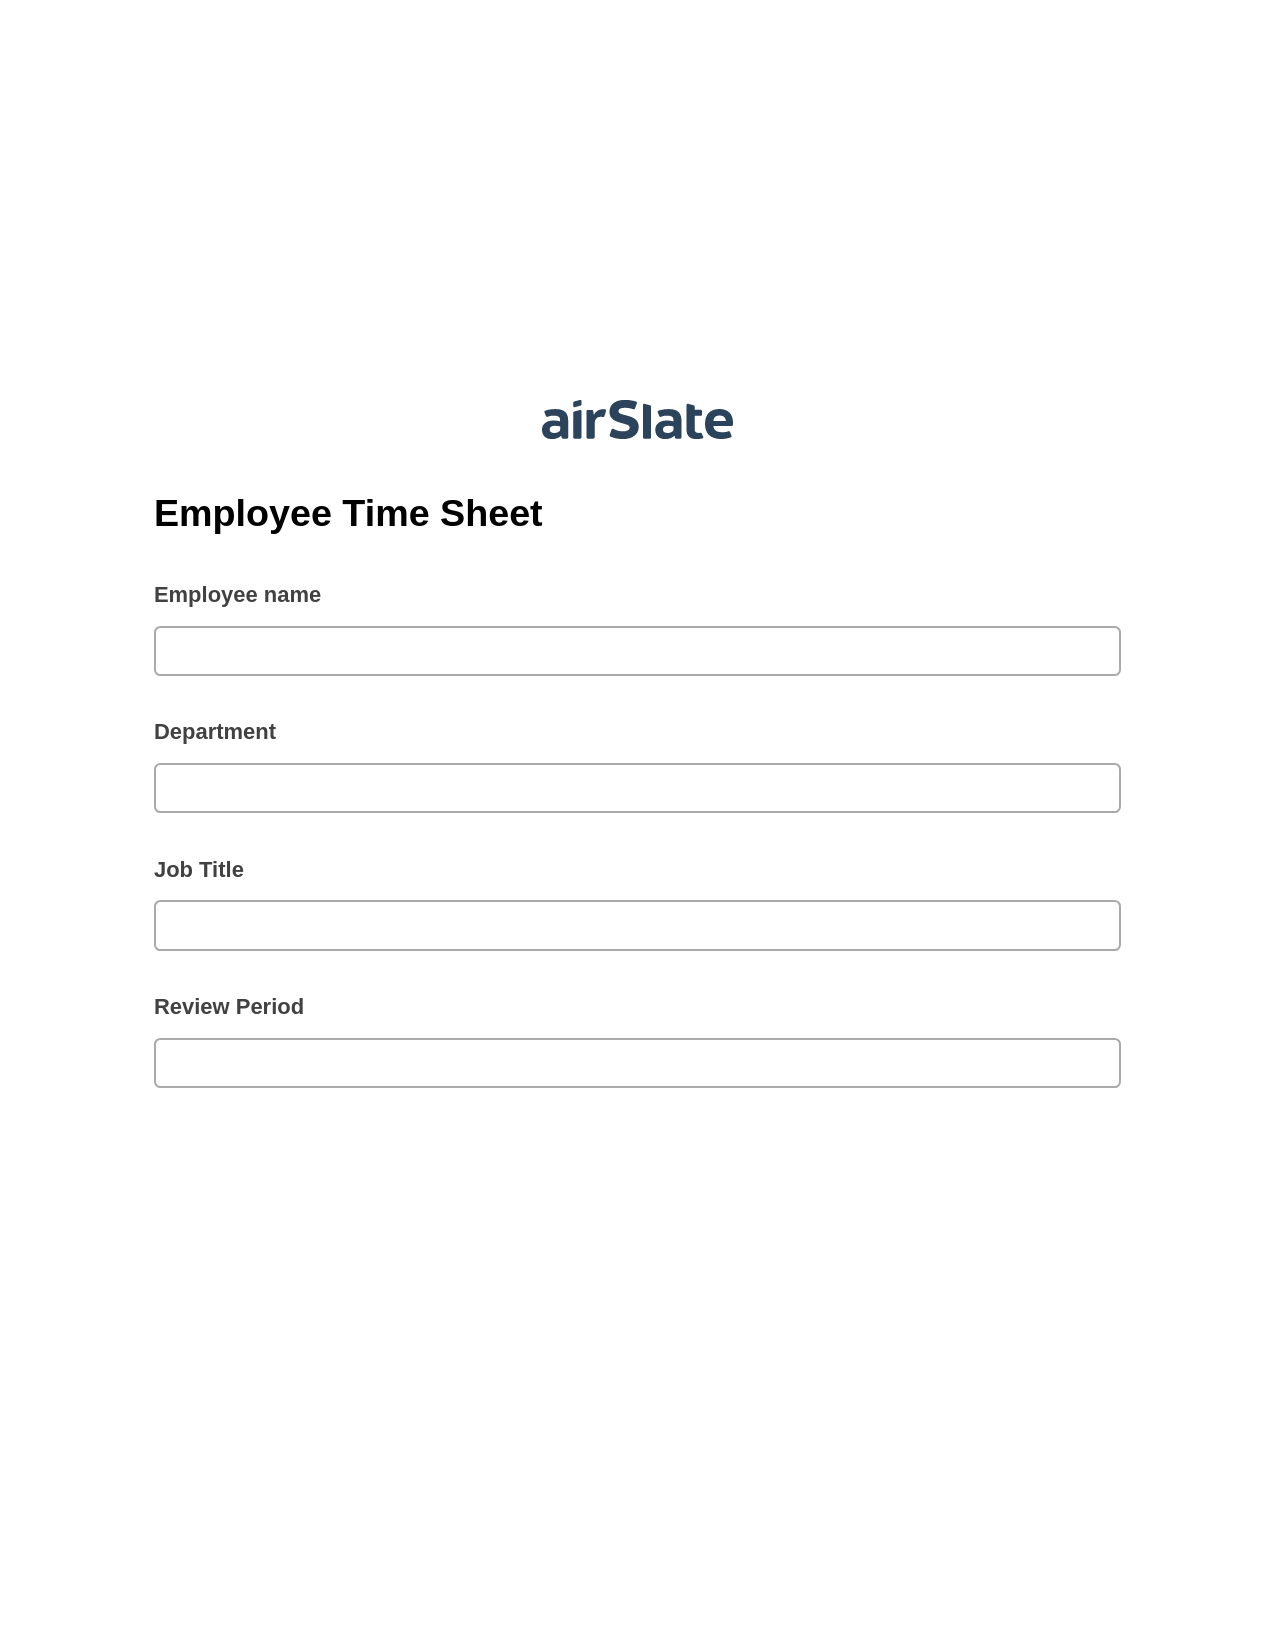 Employee Time Sheet Pre-fill from CSV File Bot, Create slate addon, Export to Google Sheet Bot